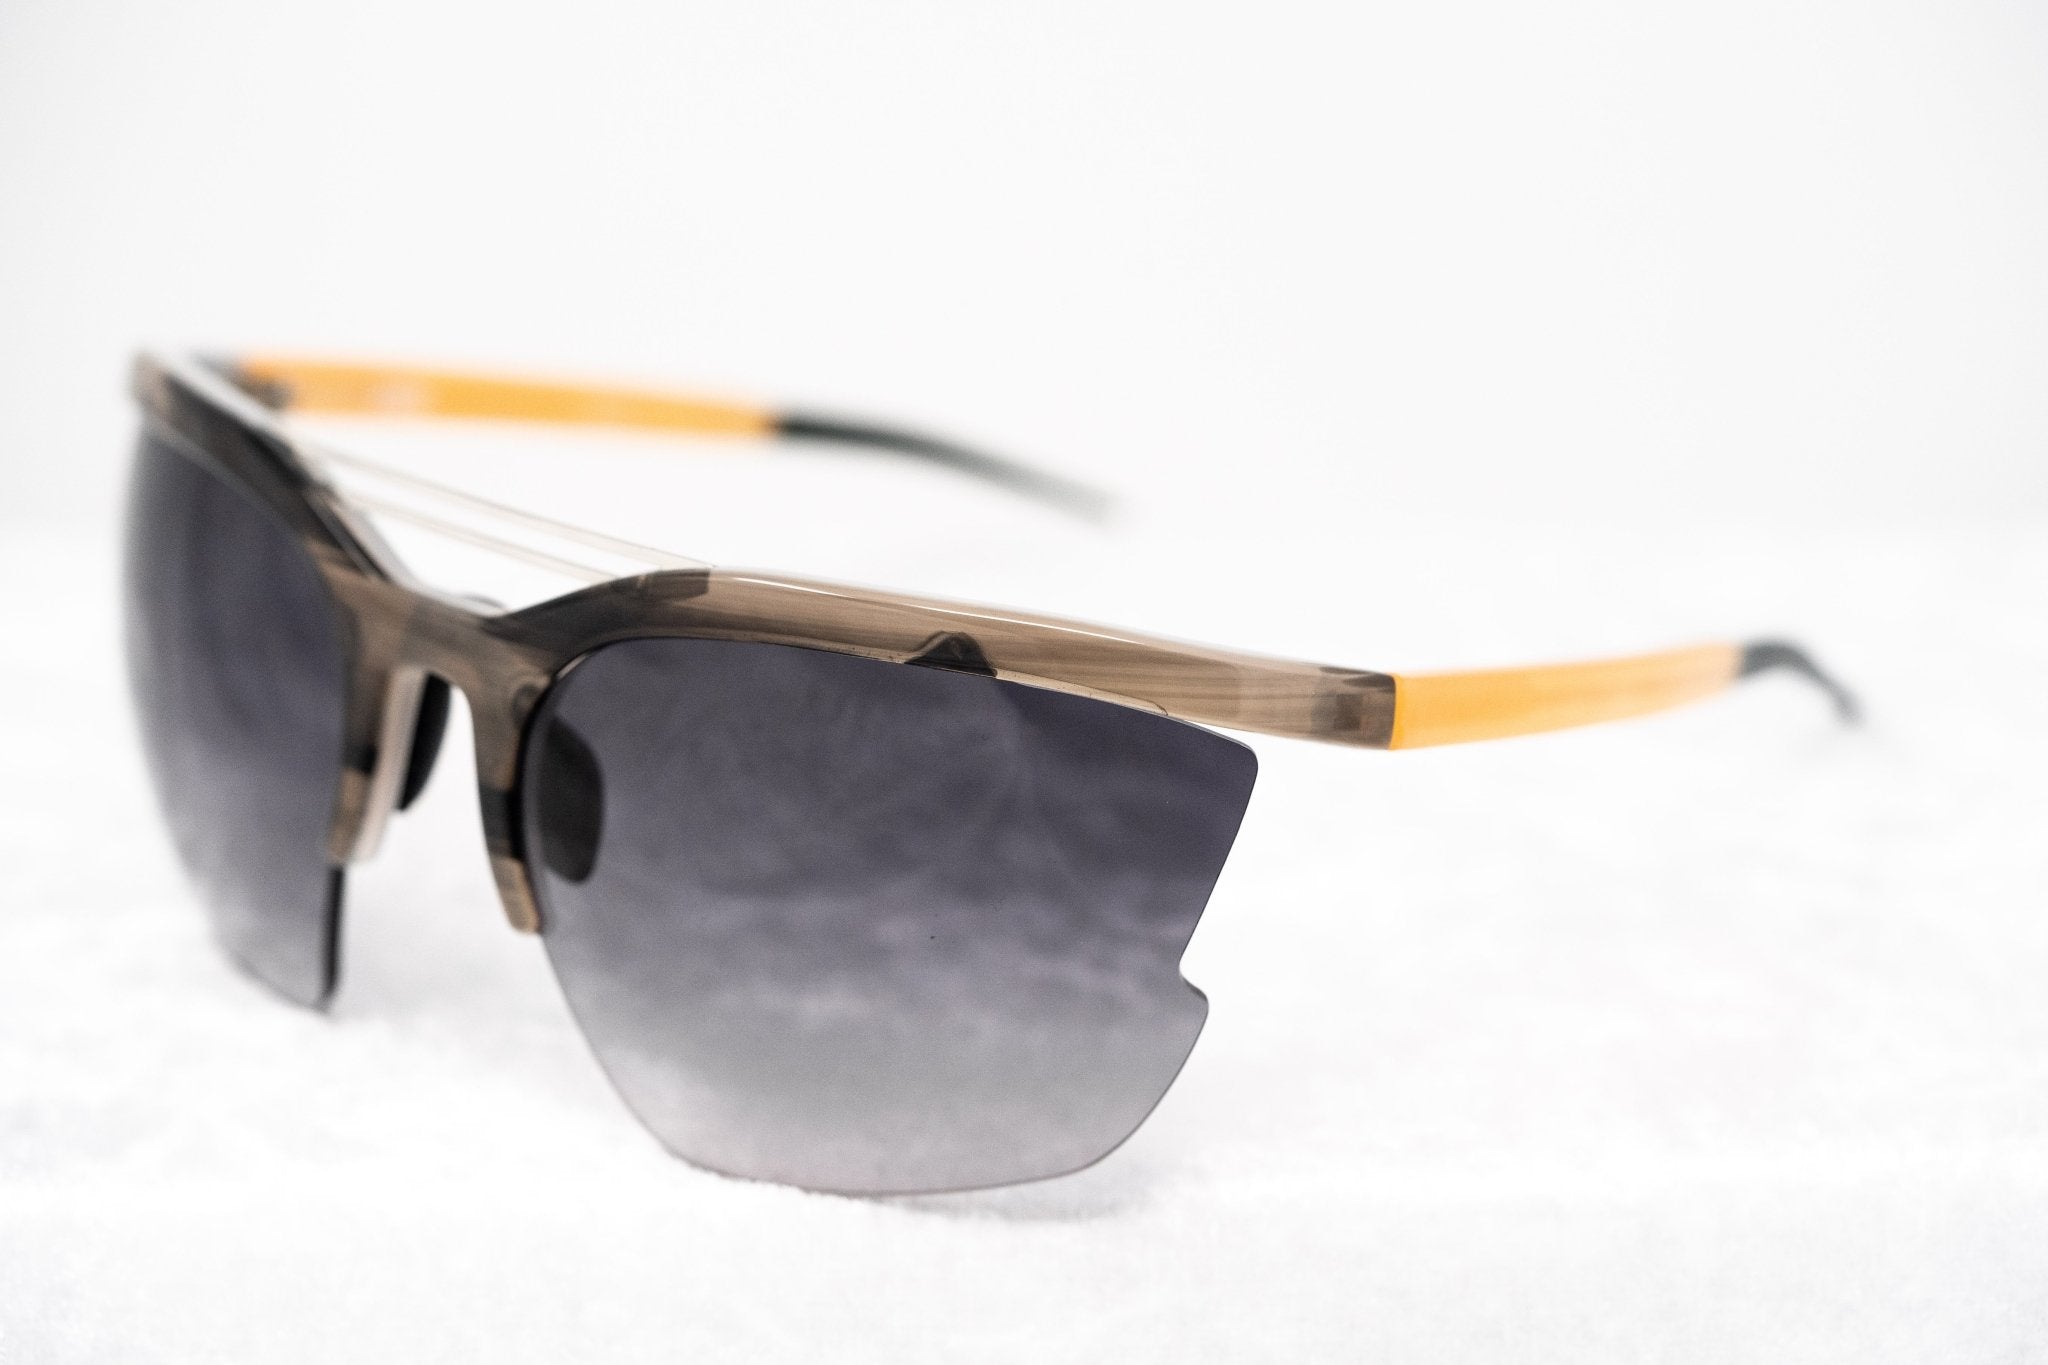 Prabal Gurung Sunglasses Female Special Frame Grey Orange Category 3 Grey Gradient Lenses PG21C3SUN - Watches & Crystals